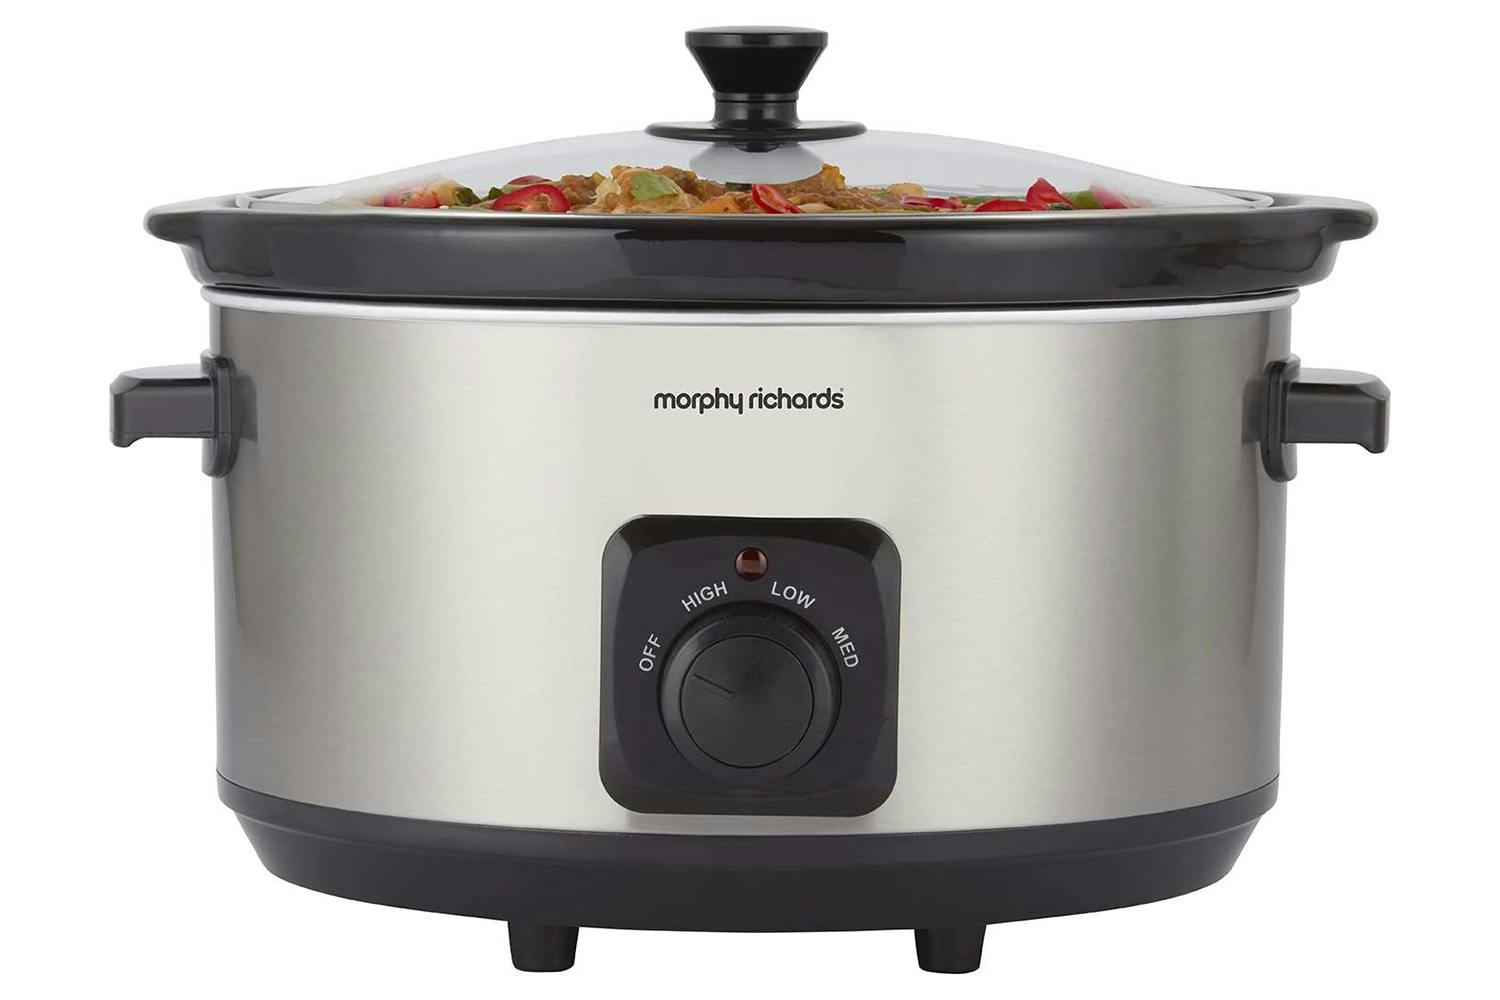 https://hniesfp.imgix.net/8/images/detailed/238/Cooker_Morphy_Richards_461013.jpg?fit=fill&bg=0FFF&w=1500&h=1000&auto=format,compress